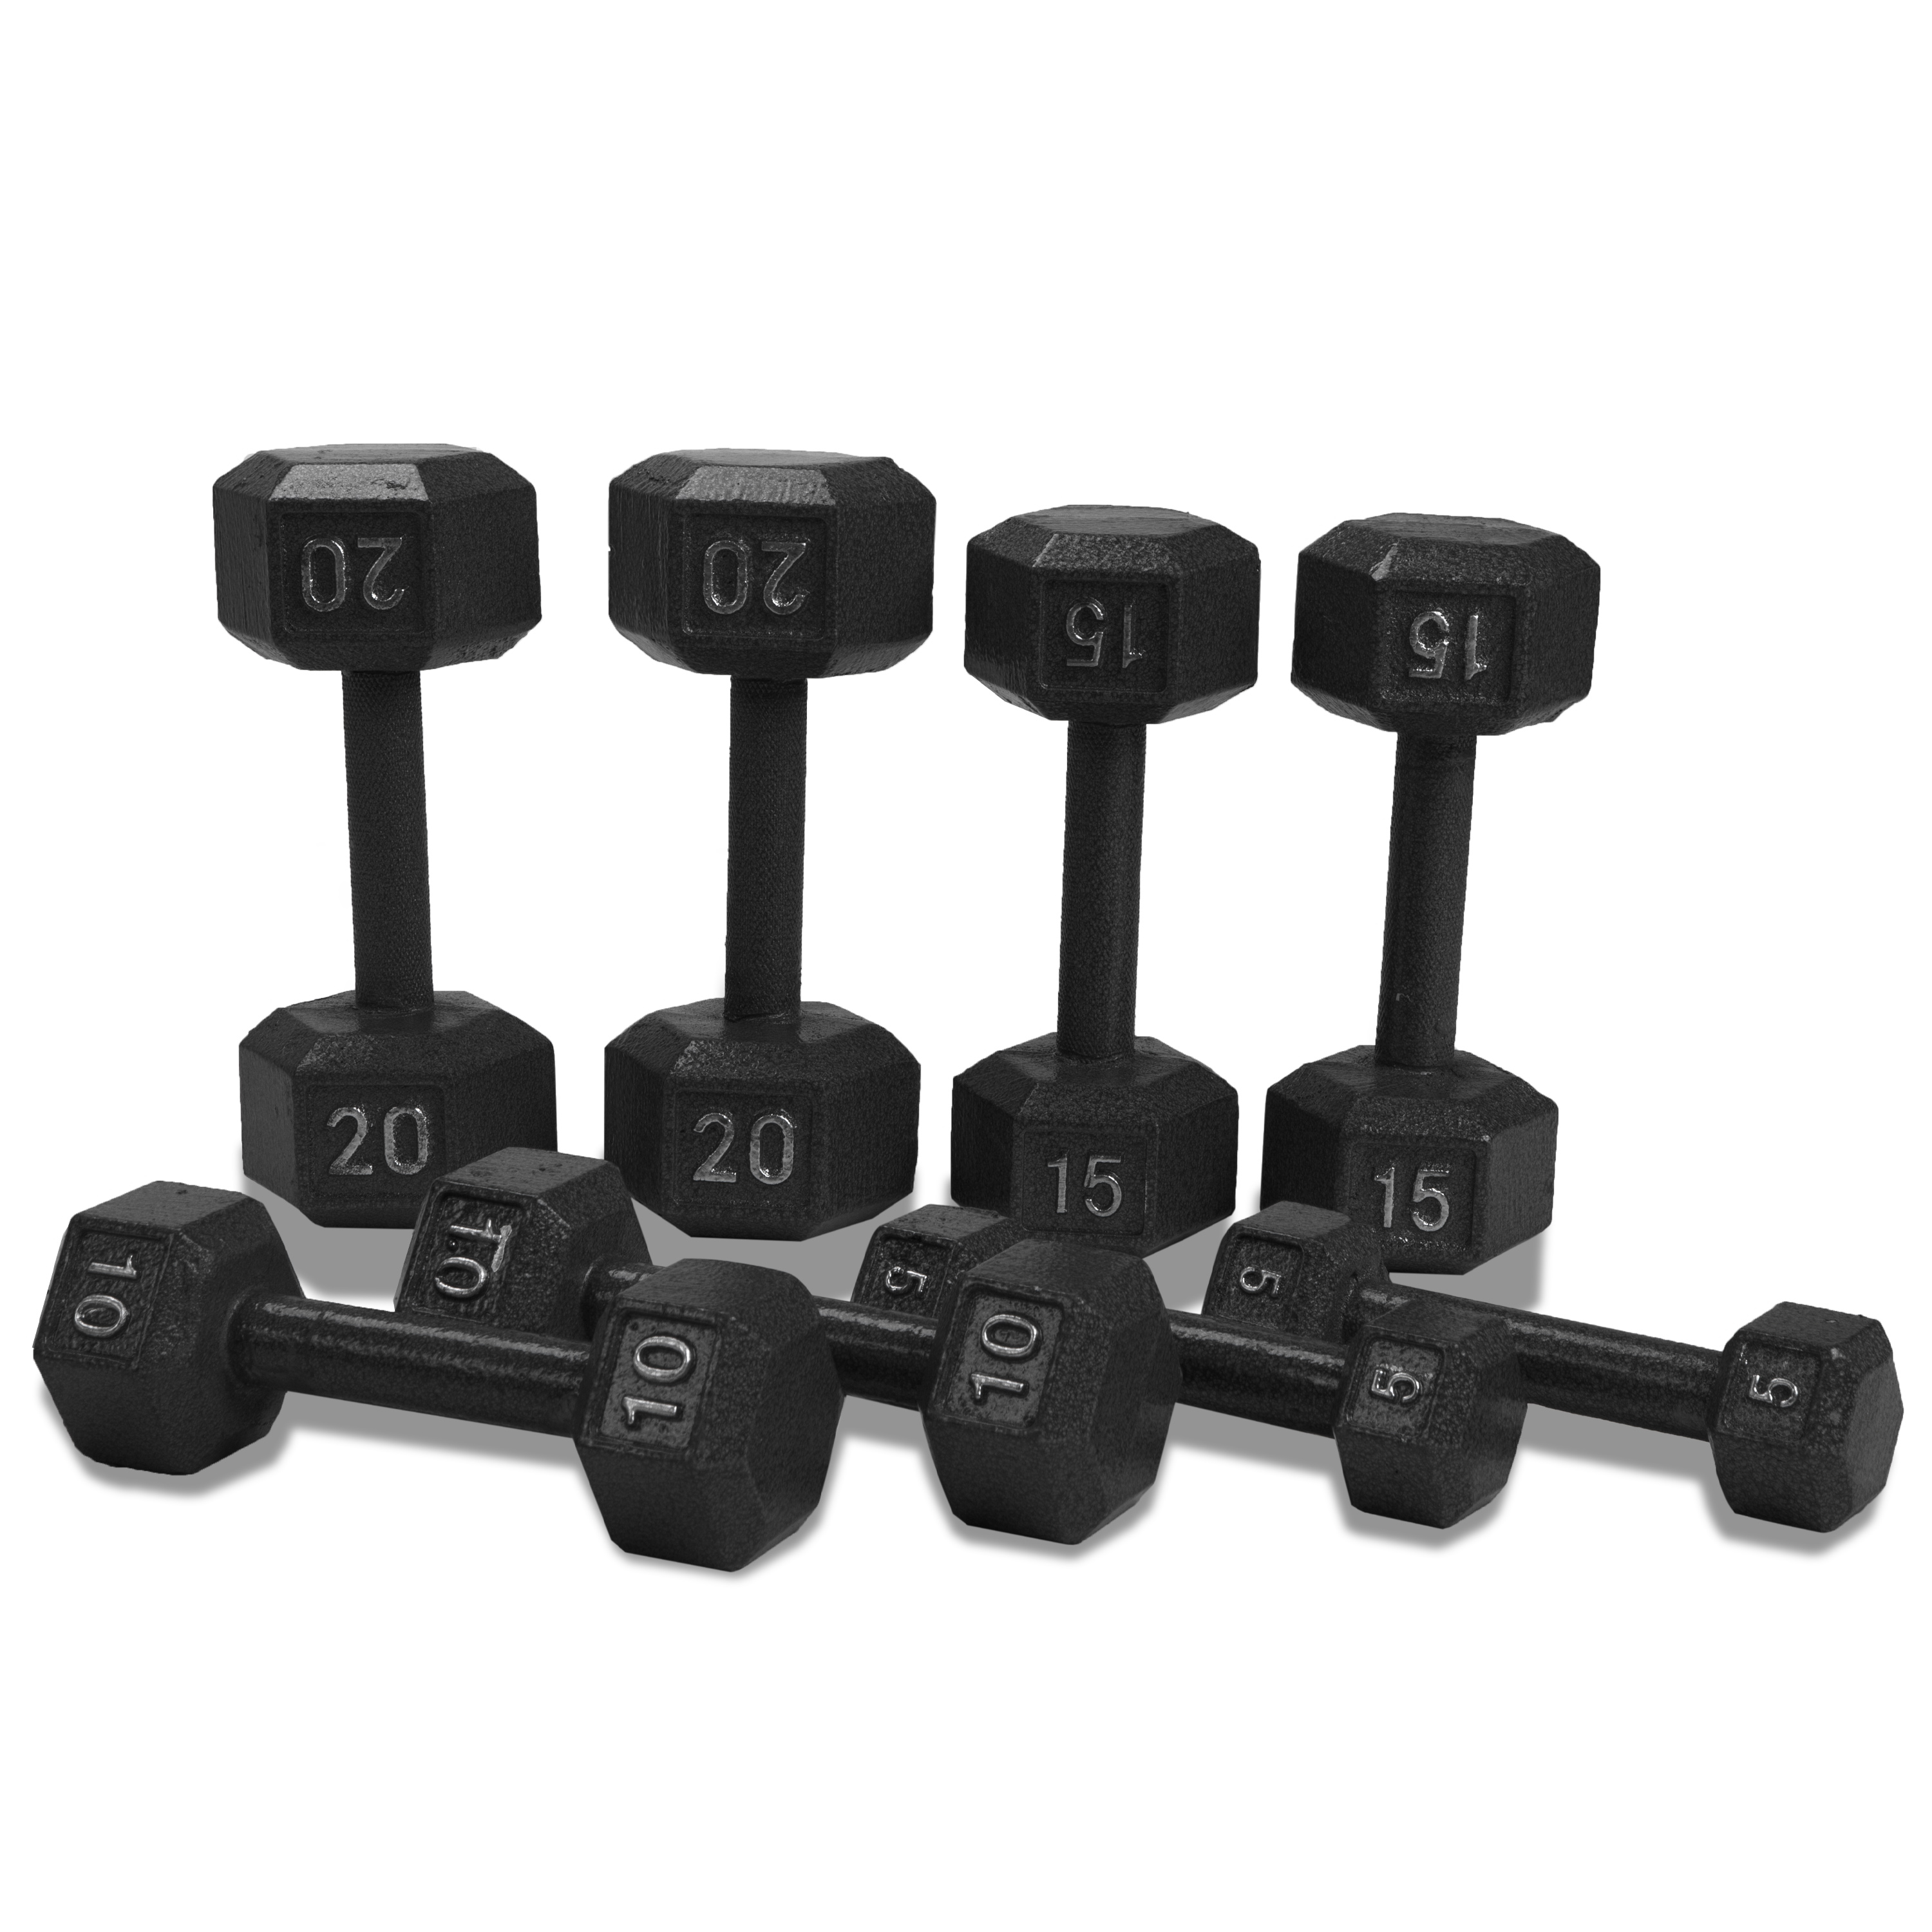 Cap Barbell 100 lb Cast Iron Hex Dumbbell Weight Set with Rack, Black - image 4 of 7